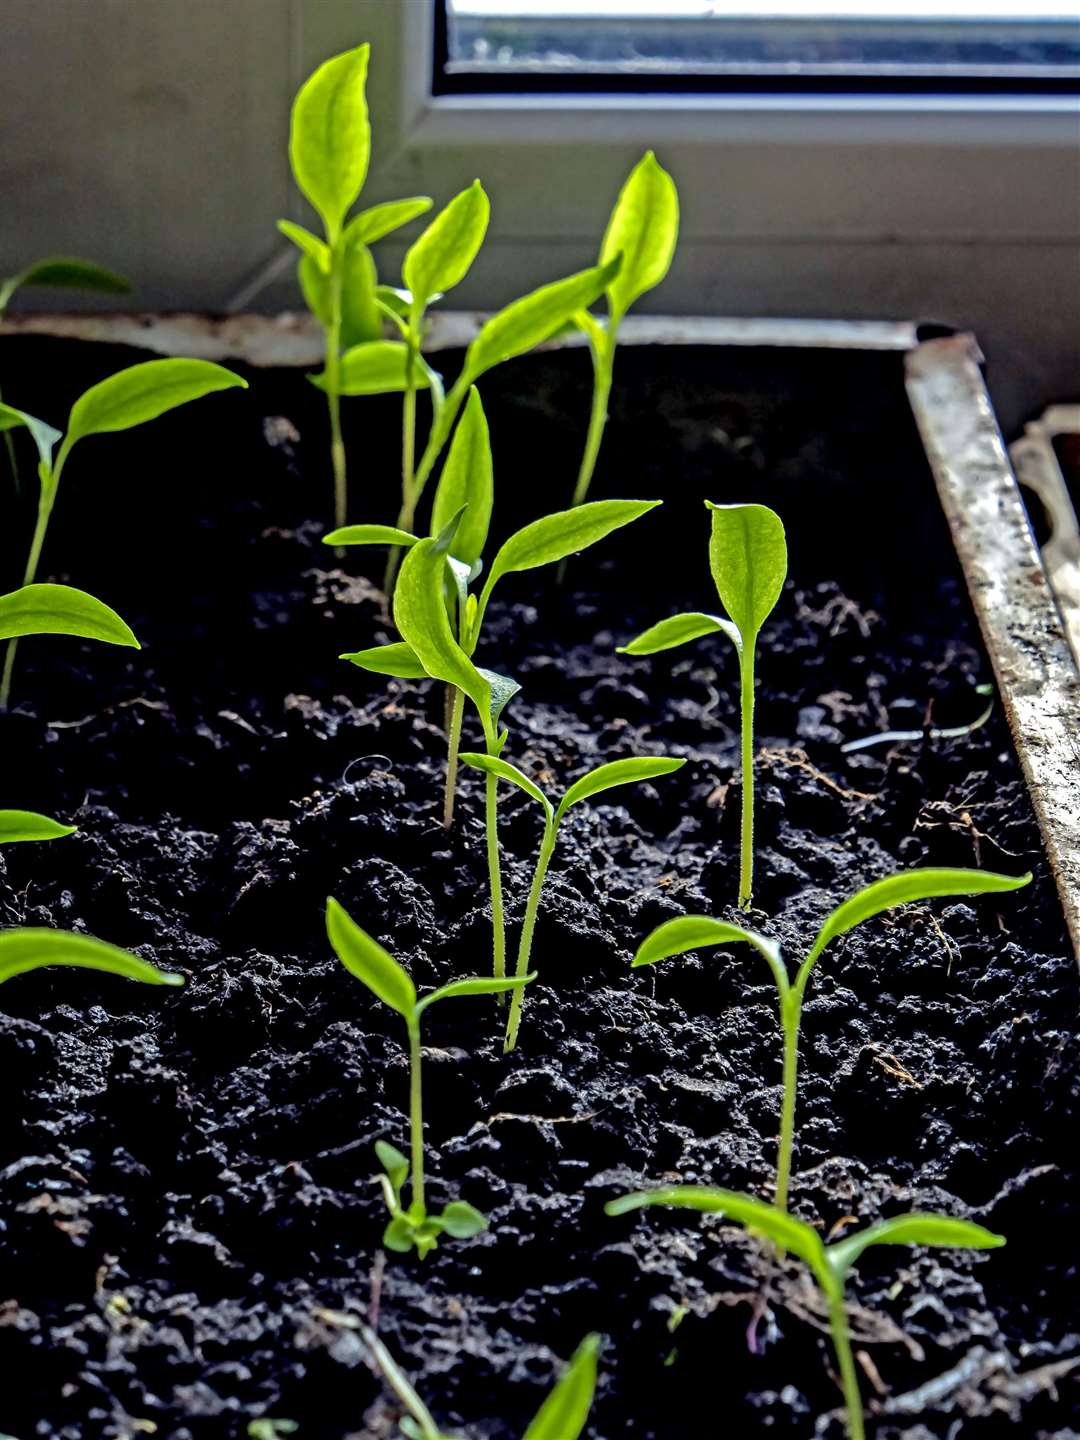 Get a feel for how much moisture is in the soil by lifting a tray of seedlings.